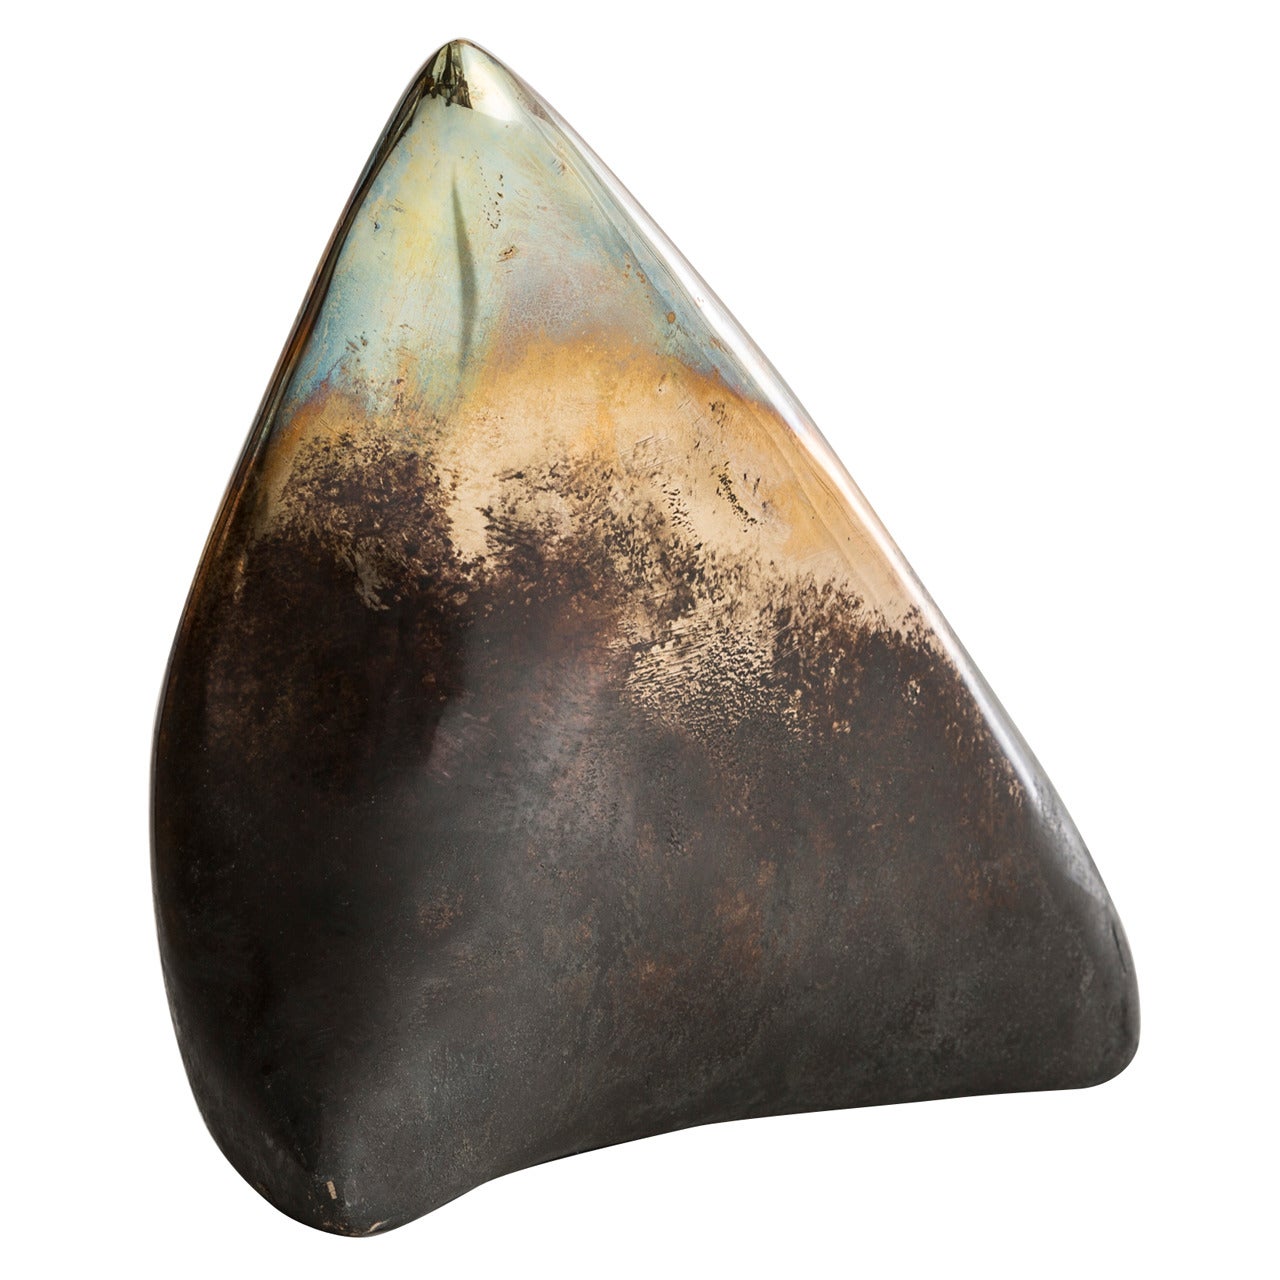 Sculptural Prehistoric Tooth Form in Bronze by Rogan Gregory, USA, 2014